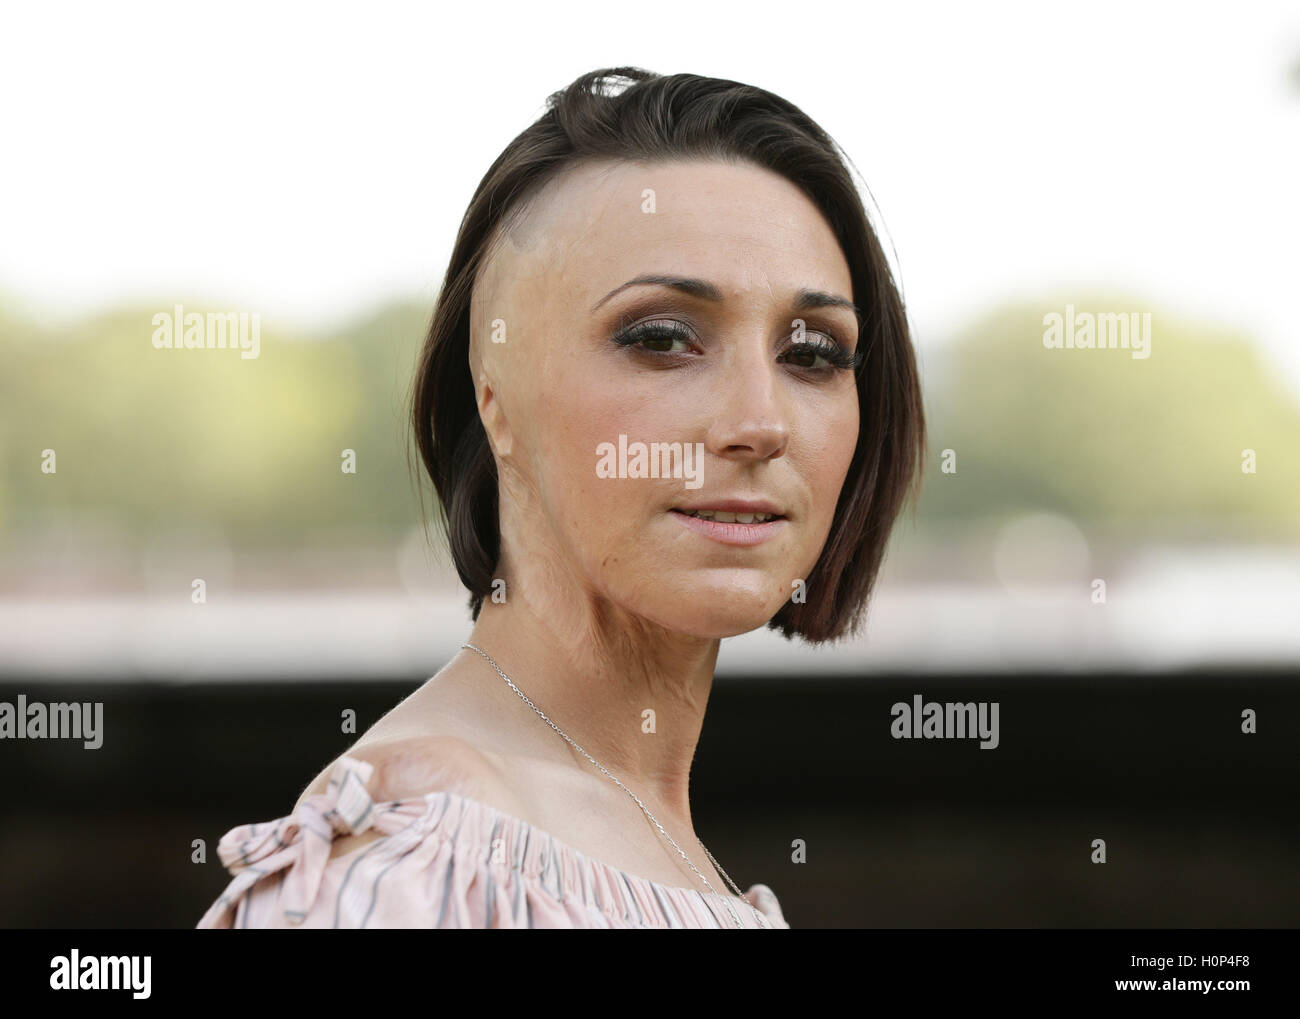 Adele Bellis, 24, who was scarred for life in an acid attack orchestrated by her controlling boyfriend, in Victoria Tower Gardens, London. Stock Photo